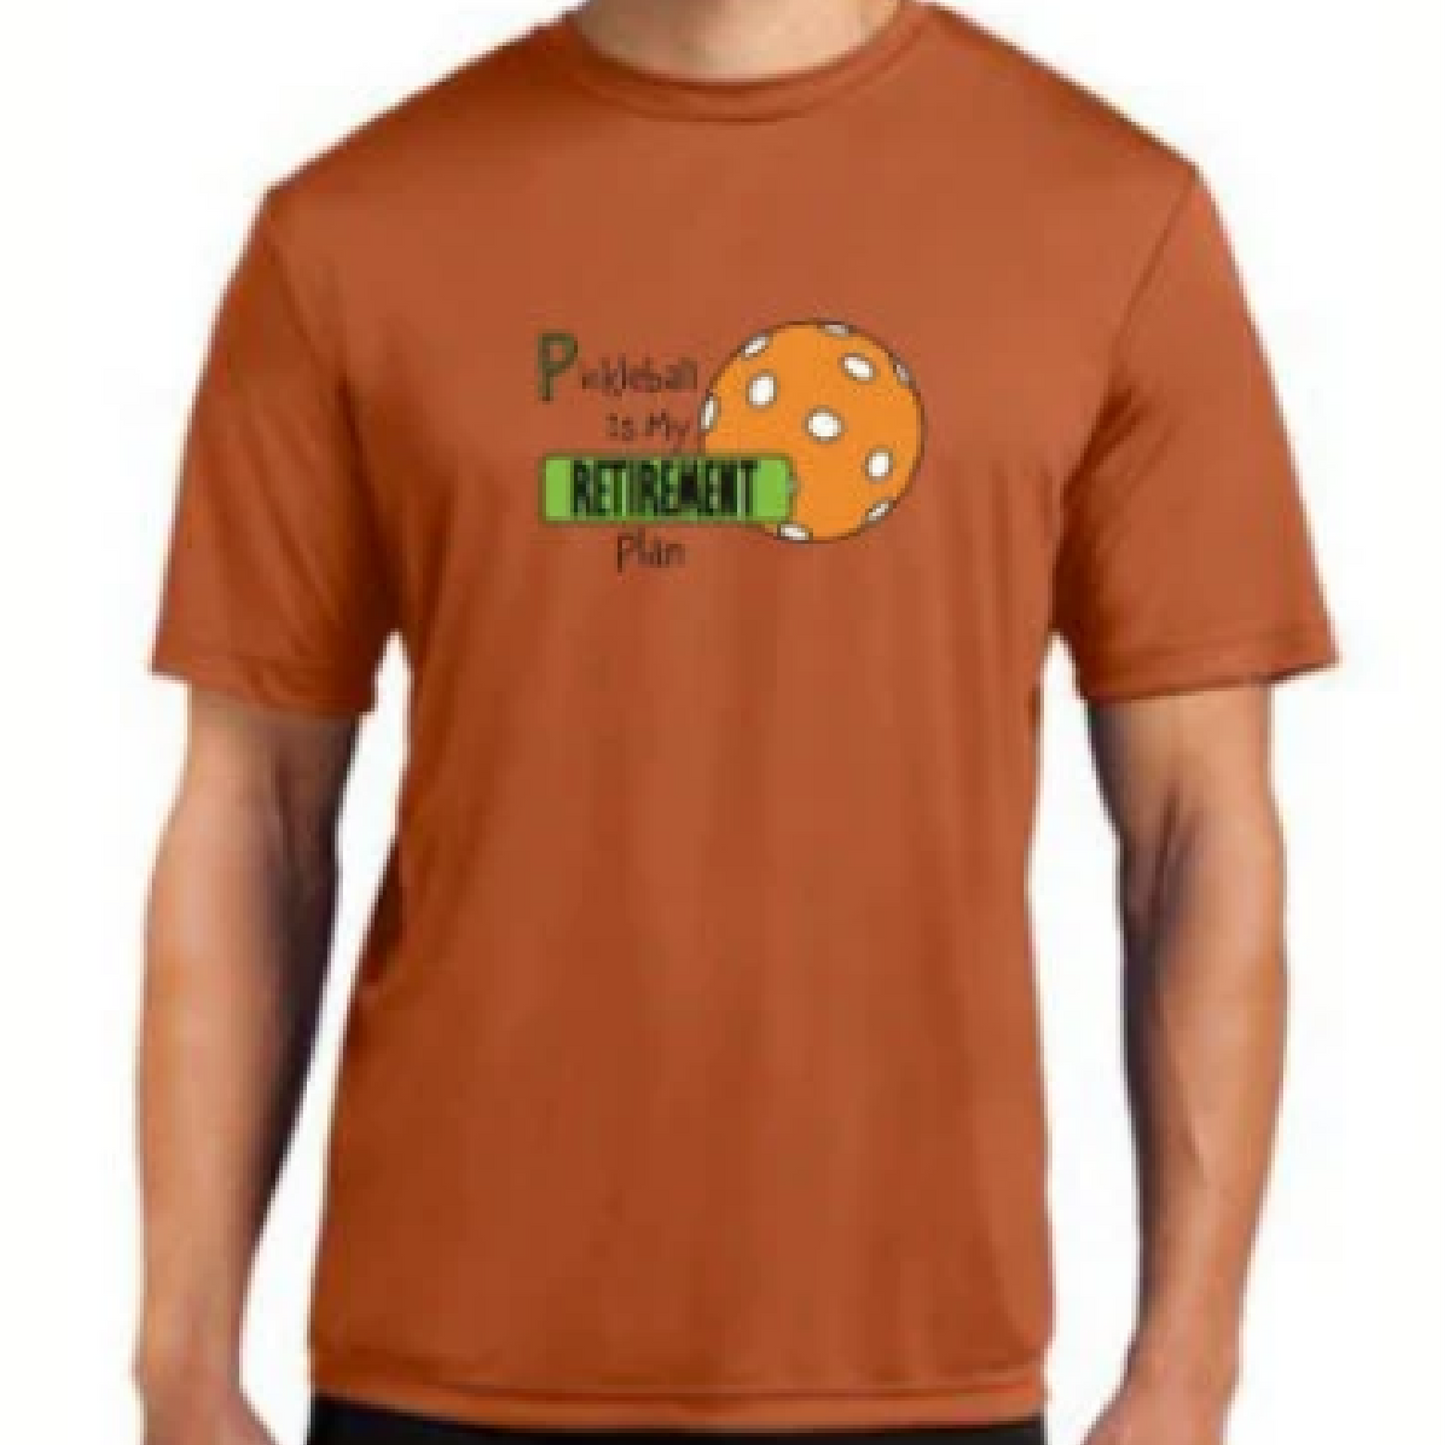 Pickleball is my Retirement Plan - Men's Short Sleeve Shirt for Pickleball  Pickleball is a one of a kind sport, and you need to have one of kind designs to stand out on the court. Dink Dink Smash offers those designs for you.